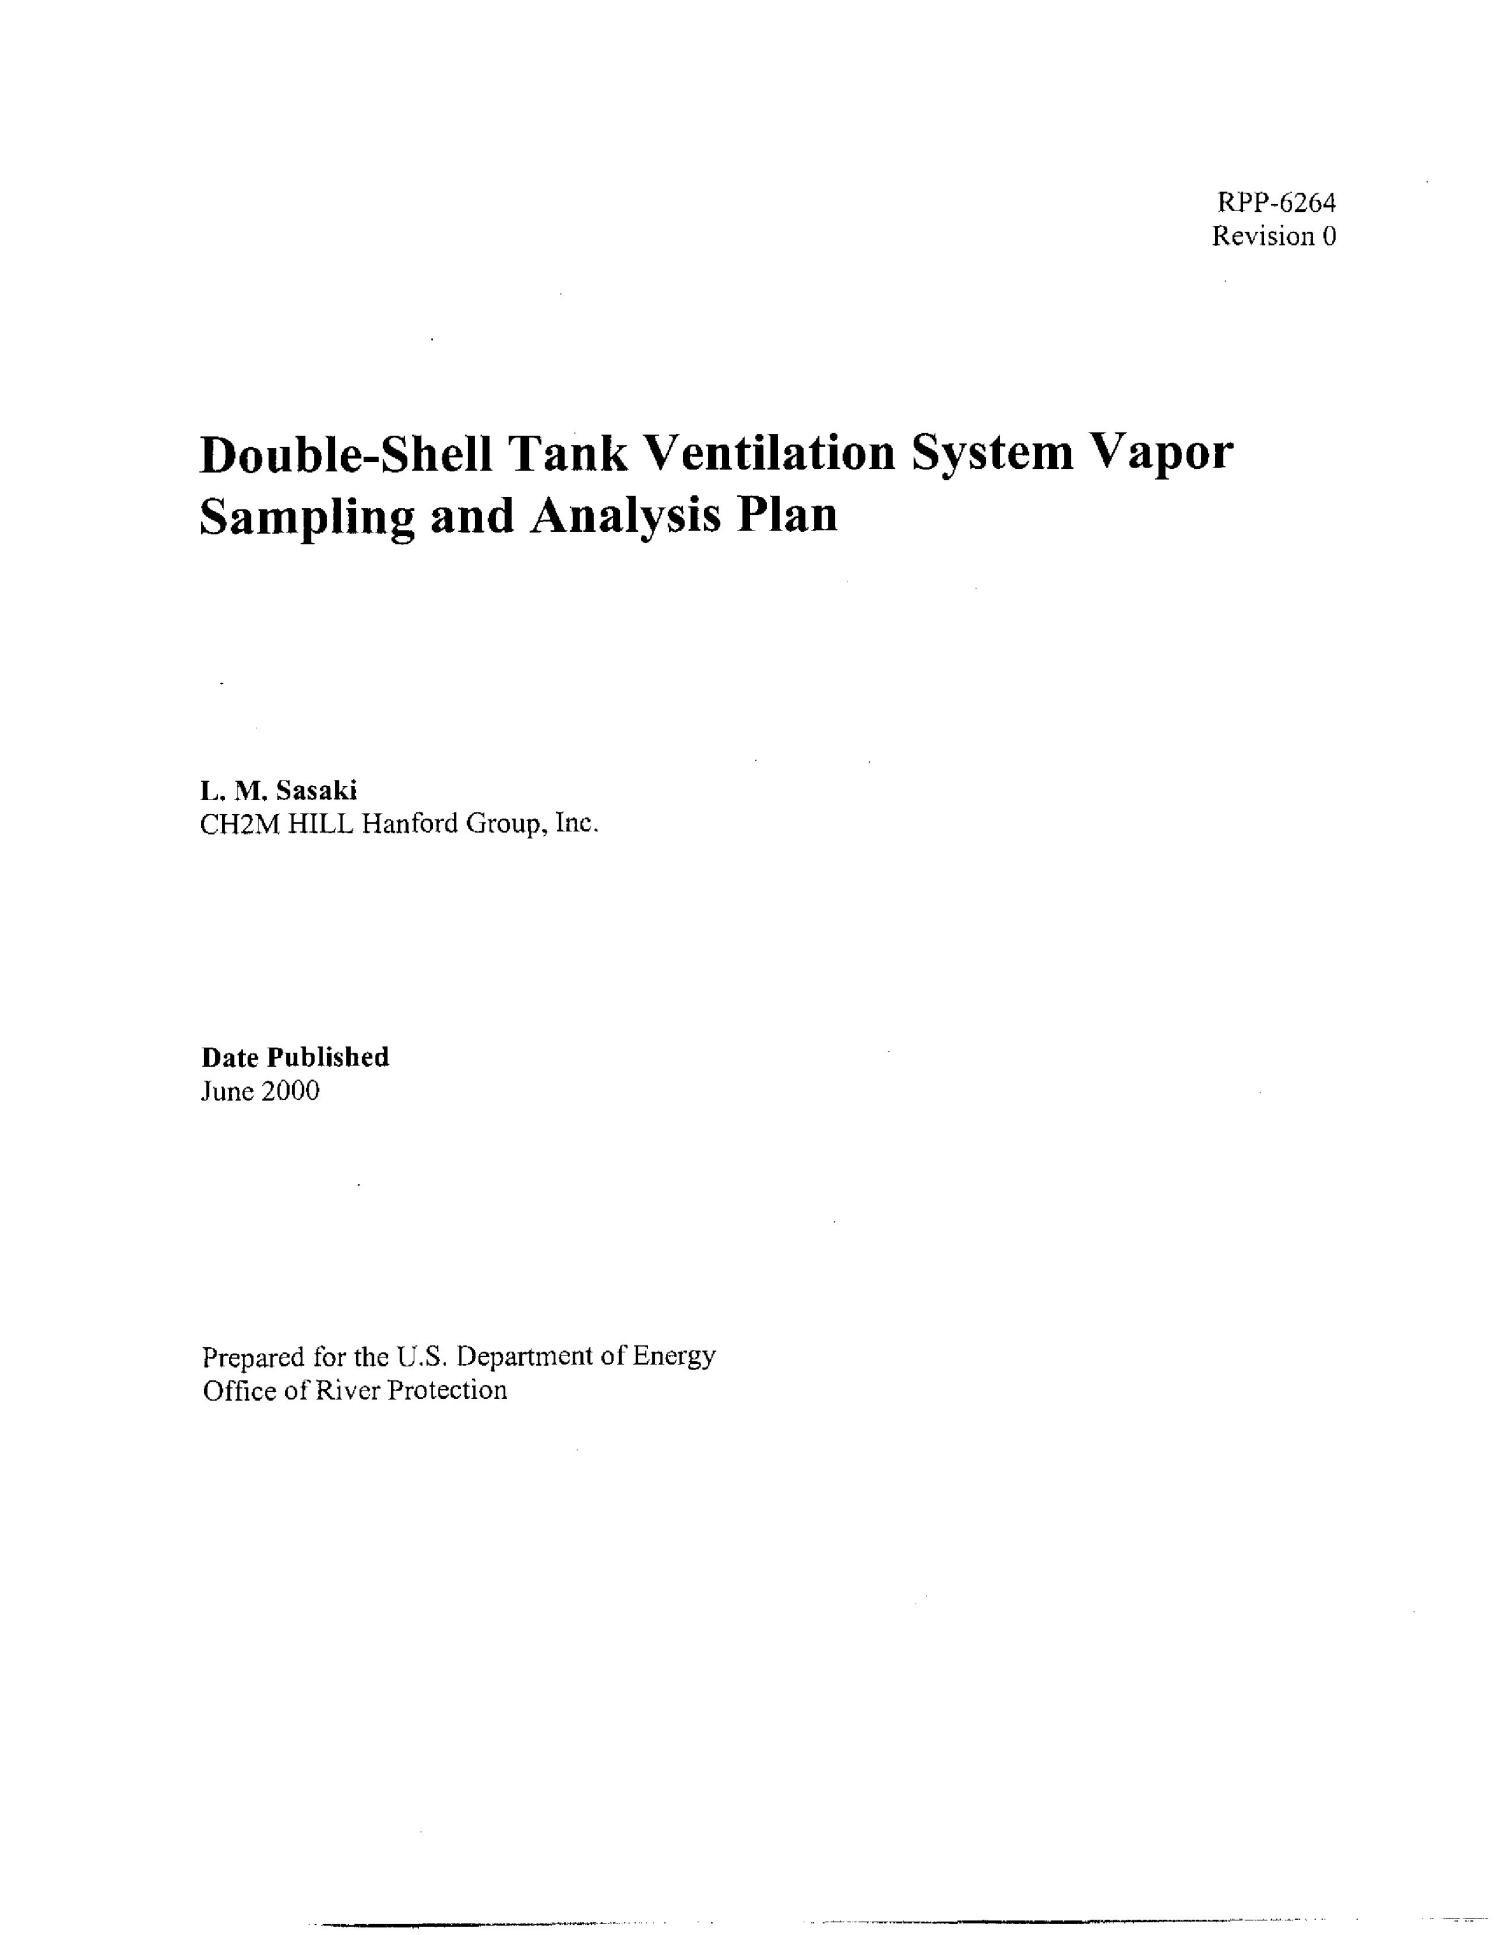 Double Shell Tank (DST) Ventilation System Vapor Sampling and Analysis Plan
                                                
                                                    [Sequence #]: 3 of 49
                                                